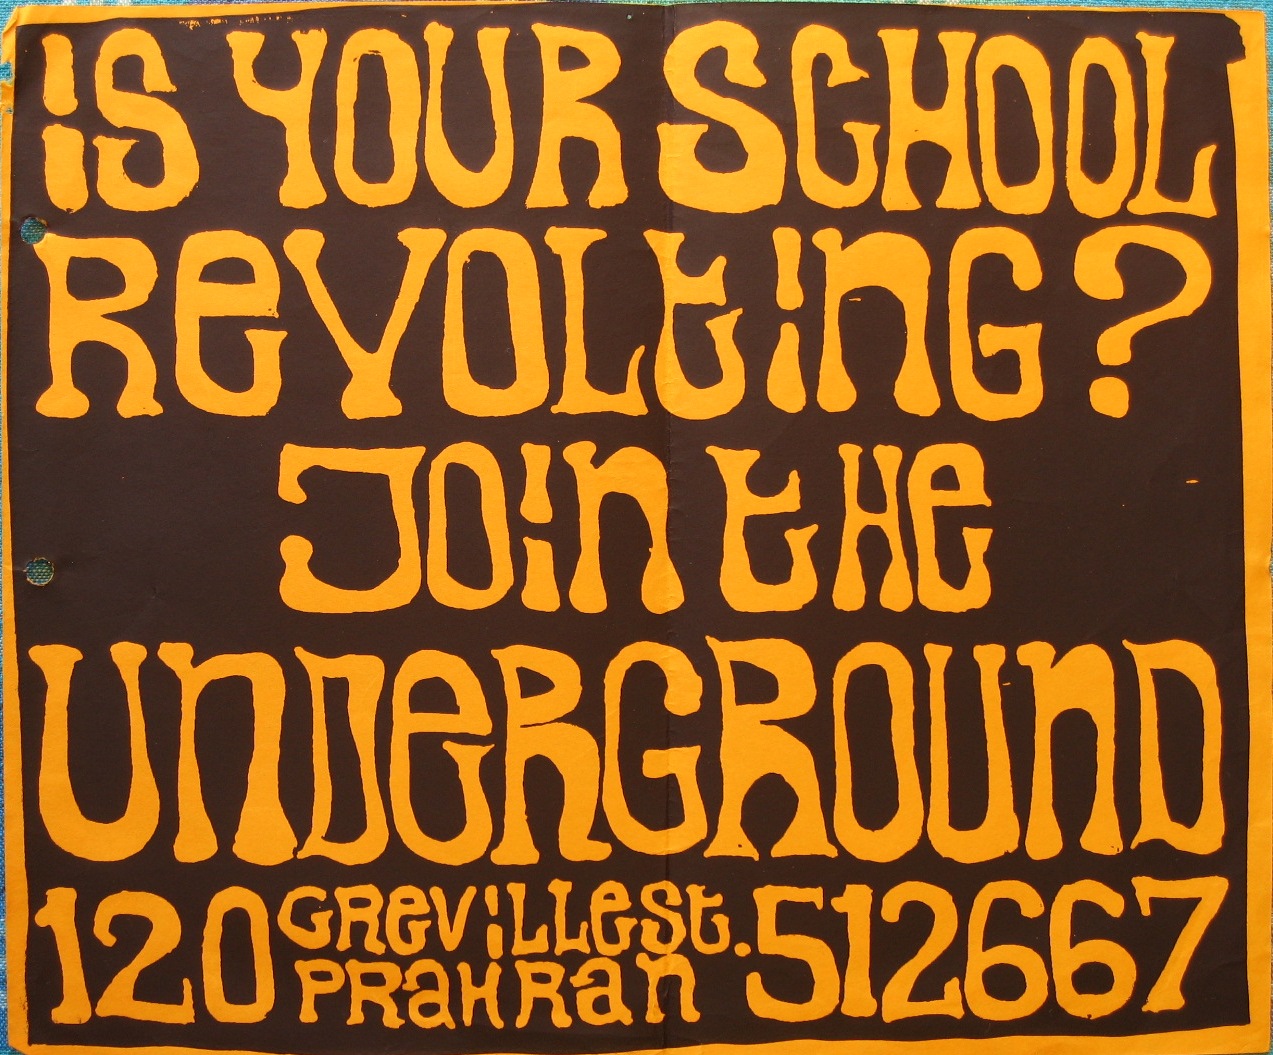 A hand drawn poster reading "Is your school revolting? Join the Underground 120 Greville St. Prahran"